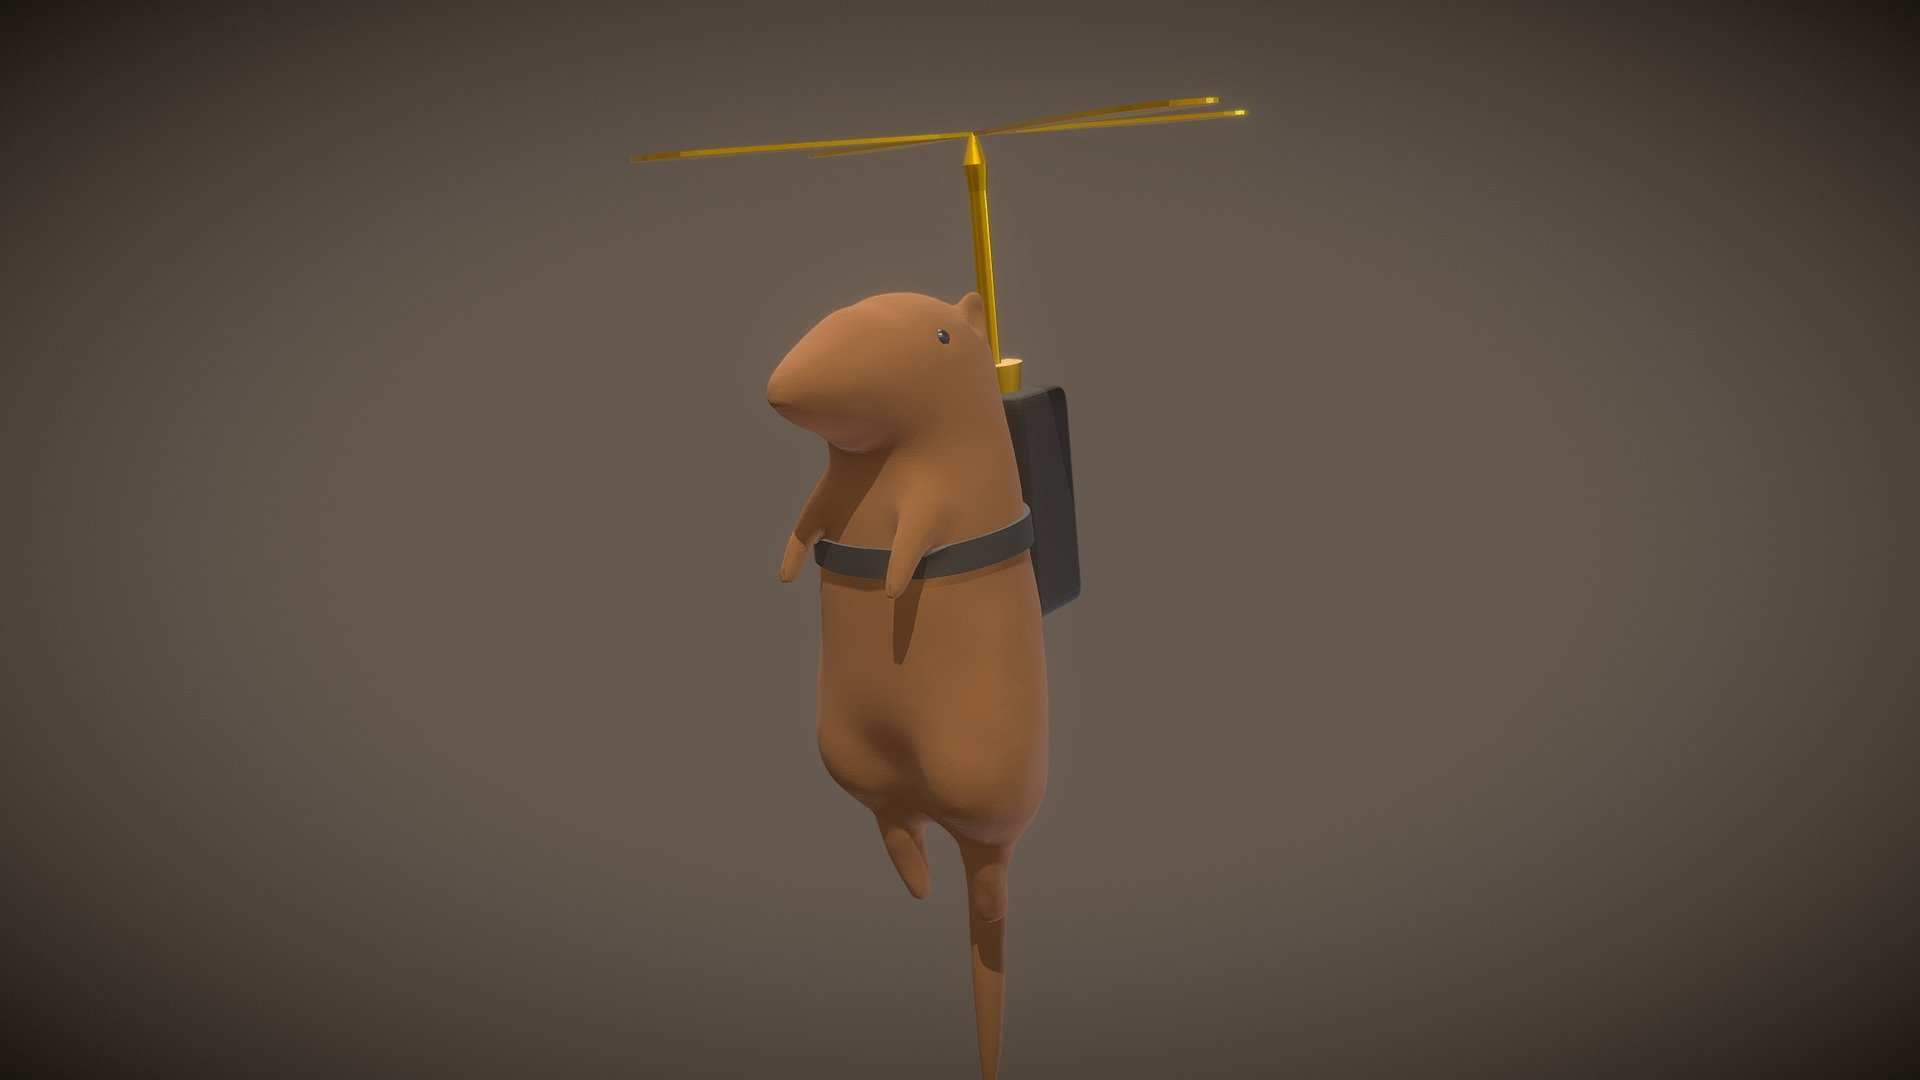 Fanart of one of shovel knights propeller rats. May revisit this sometime and do it right 3d model